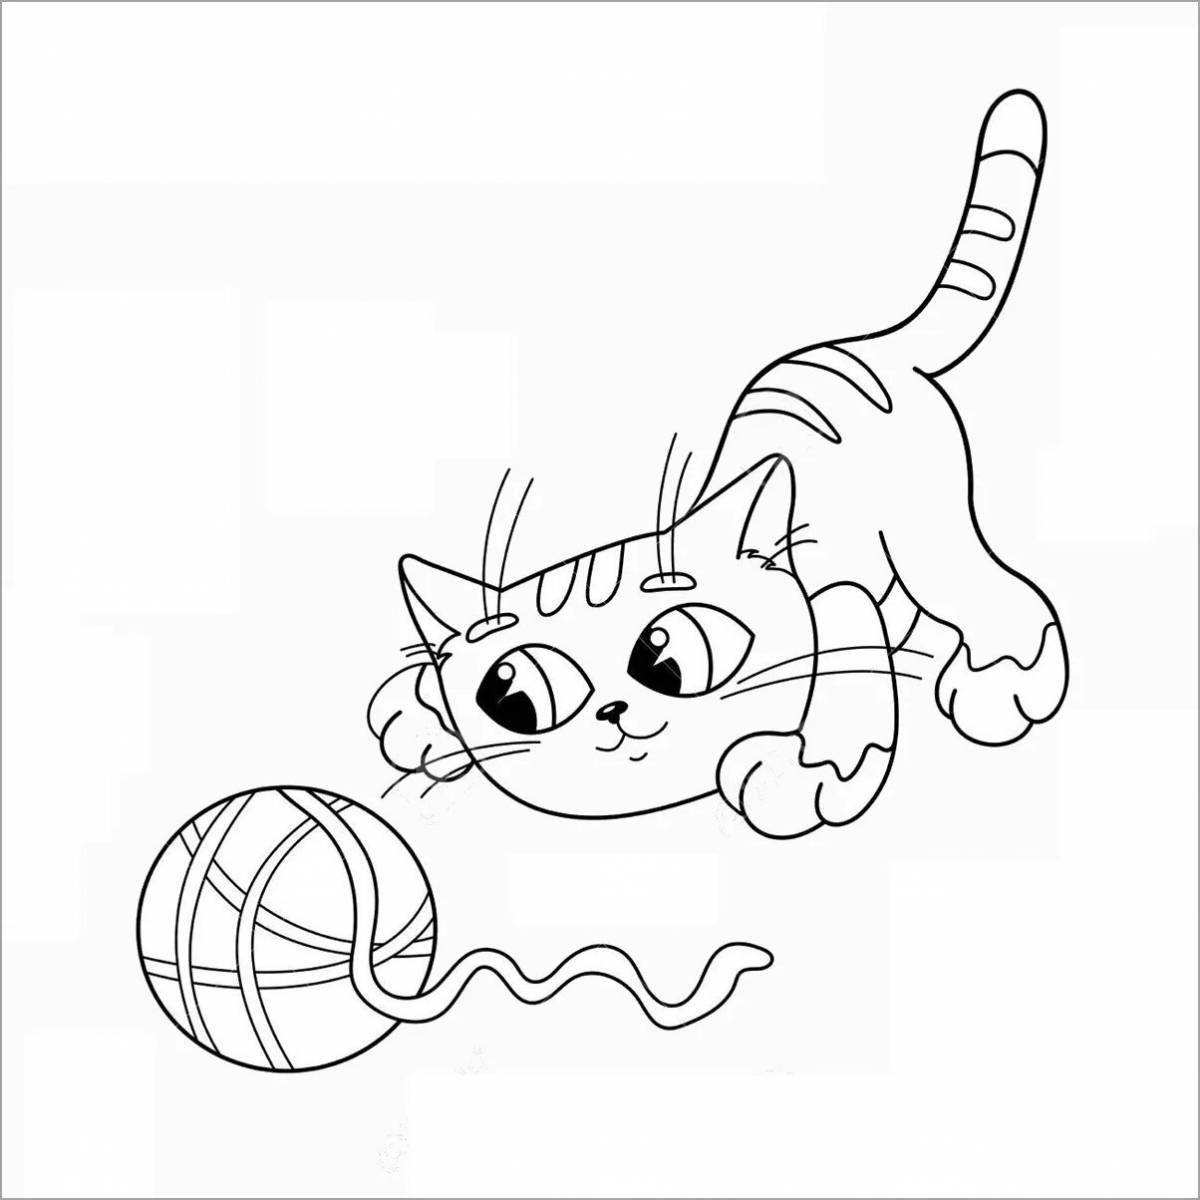 Coloring animated cat with a ball